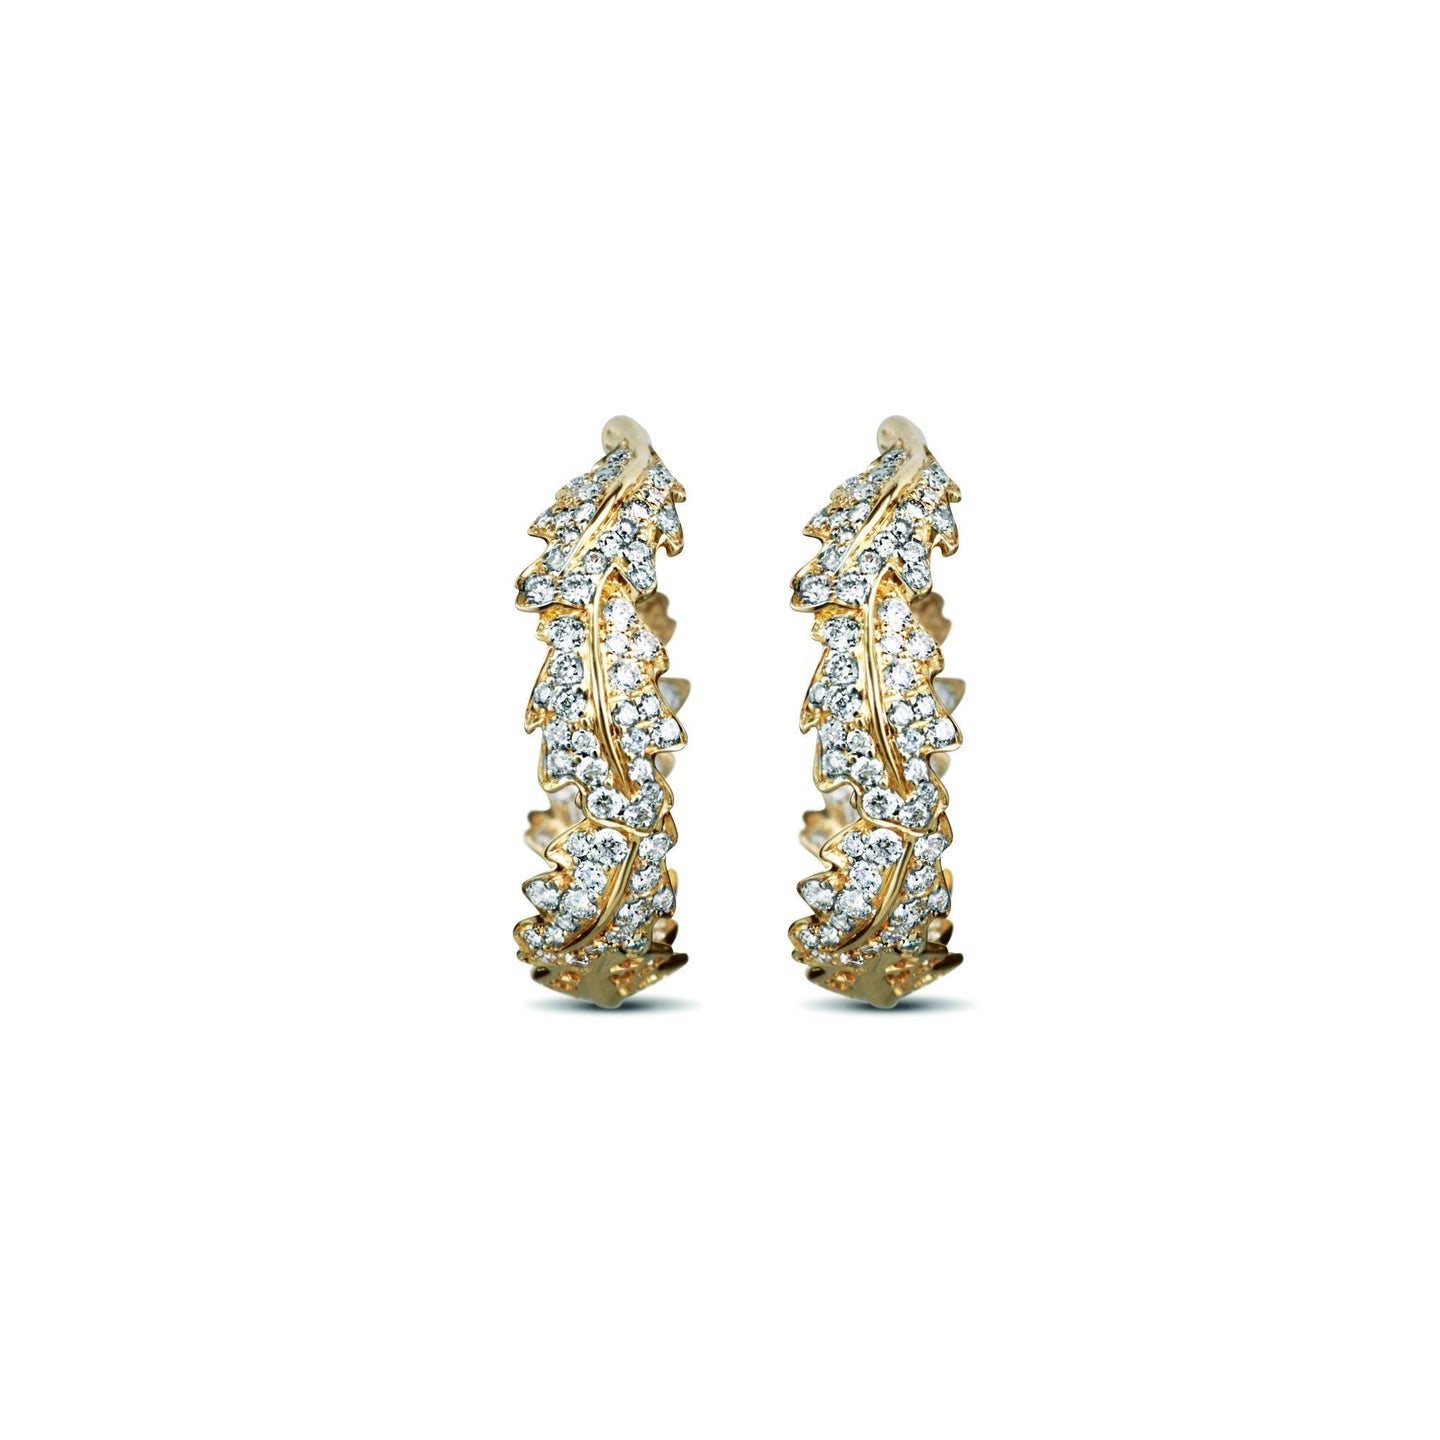 Woodland Small Oak Leaf Earrings in 18ct Yellow Gold with Diamonds